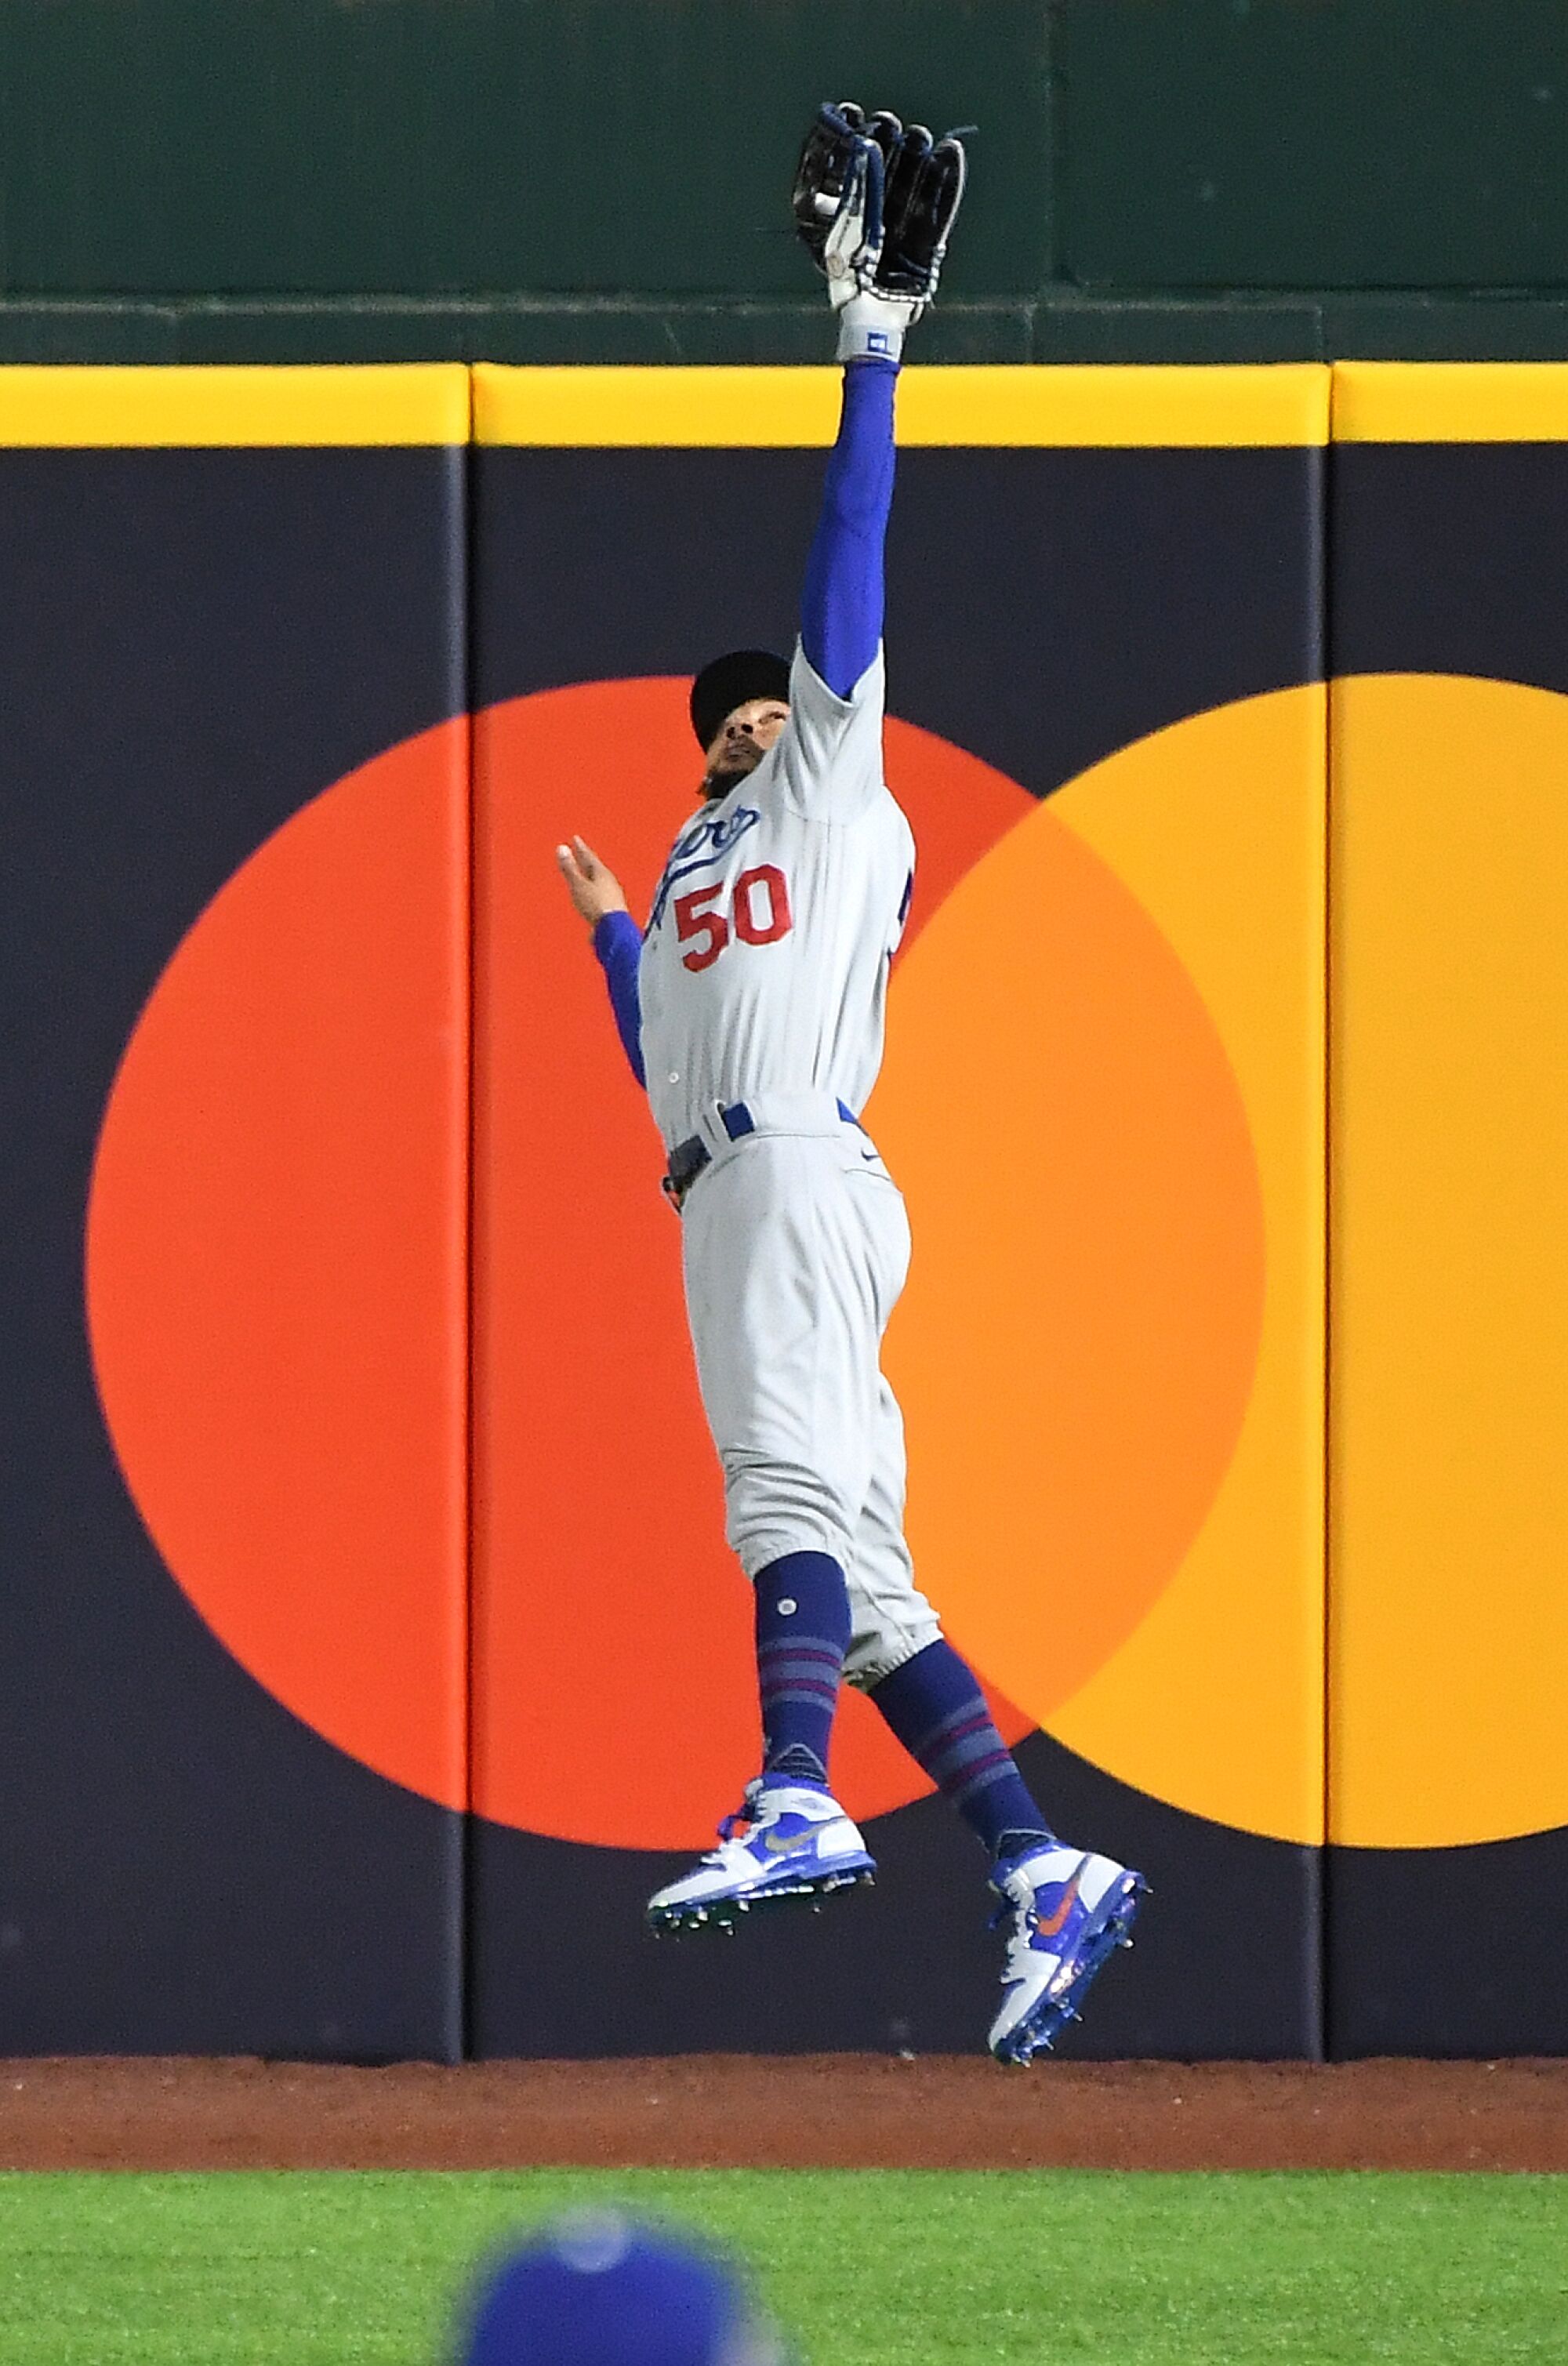 Dodgers right fielder Mookie Betts makes a leaping catch off the bat of Brandon Lowe in the second inning.